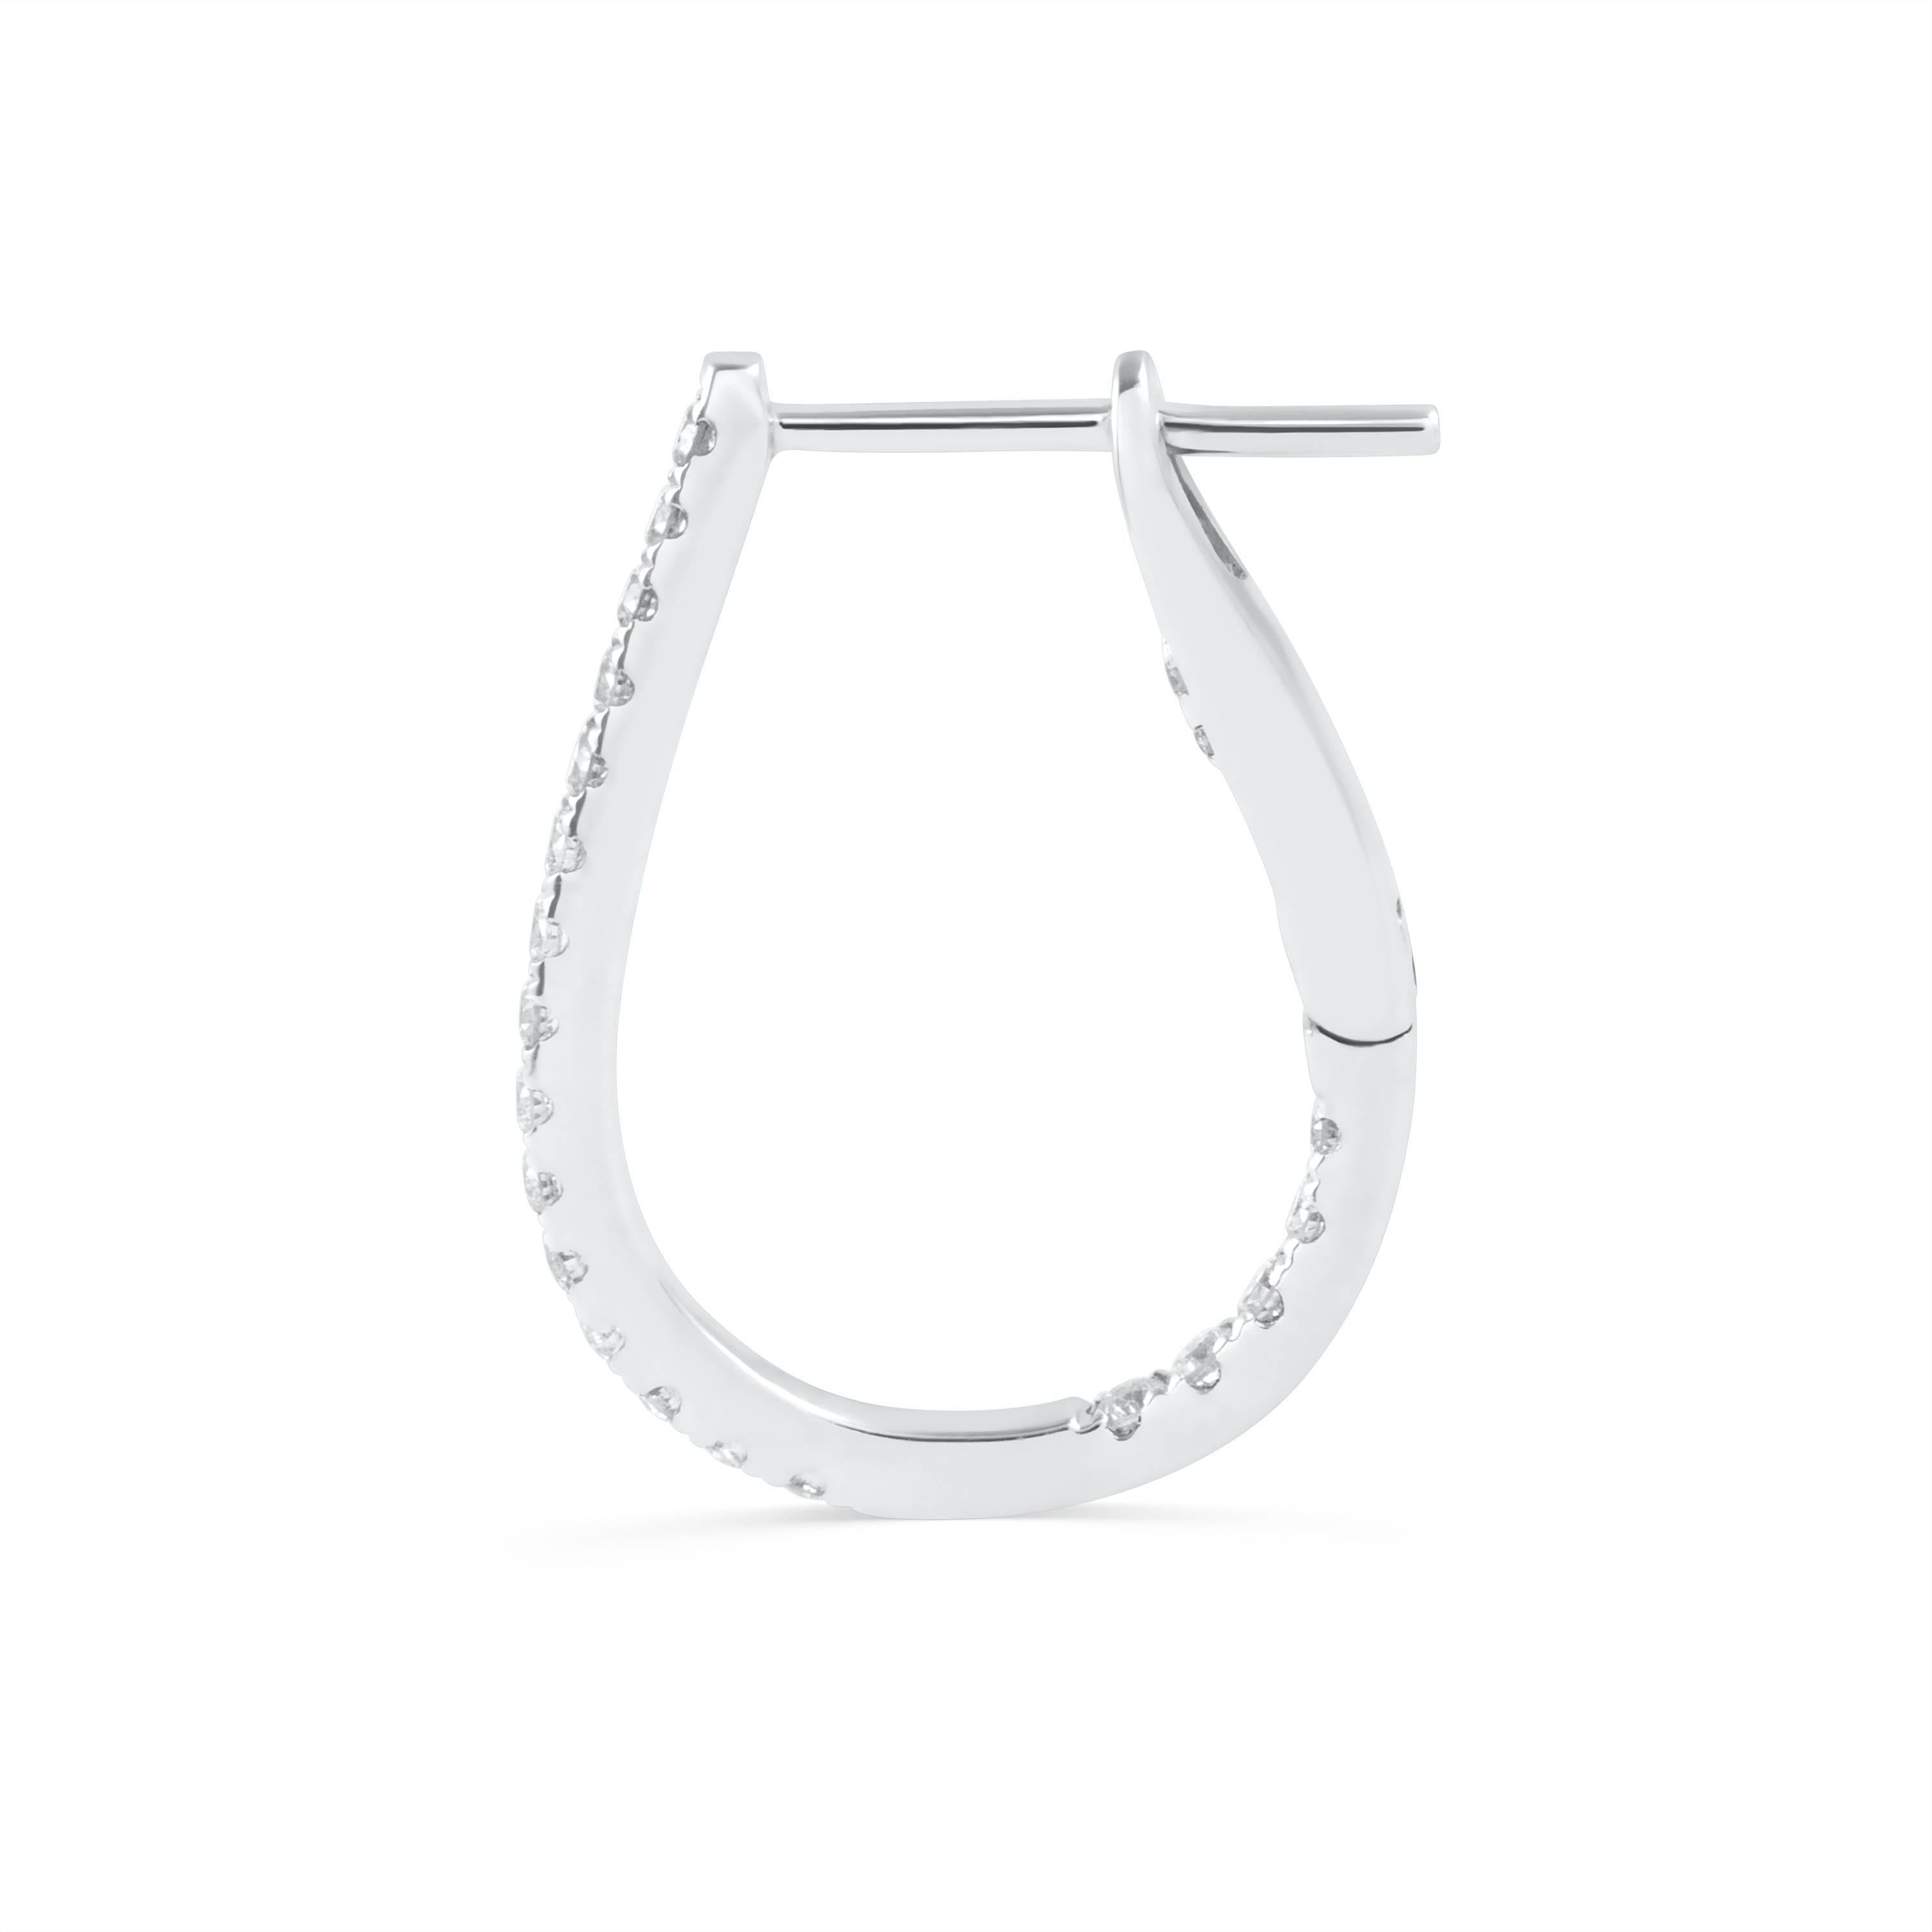  A non-traditional yet gorgeous pair of hoop earrings designed like a pear shape embellished with sparkling round diamonds. Diamonds weigh 0.46 carats total. Length approximately 0.75 inches. Made in 18k white gold.

Style available in different